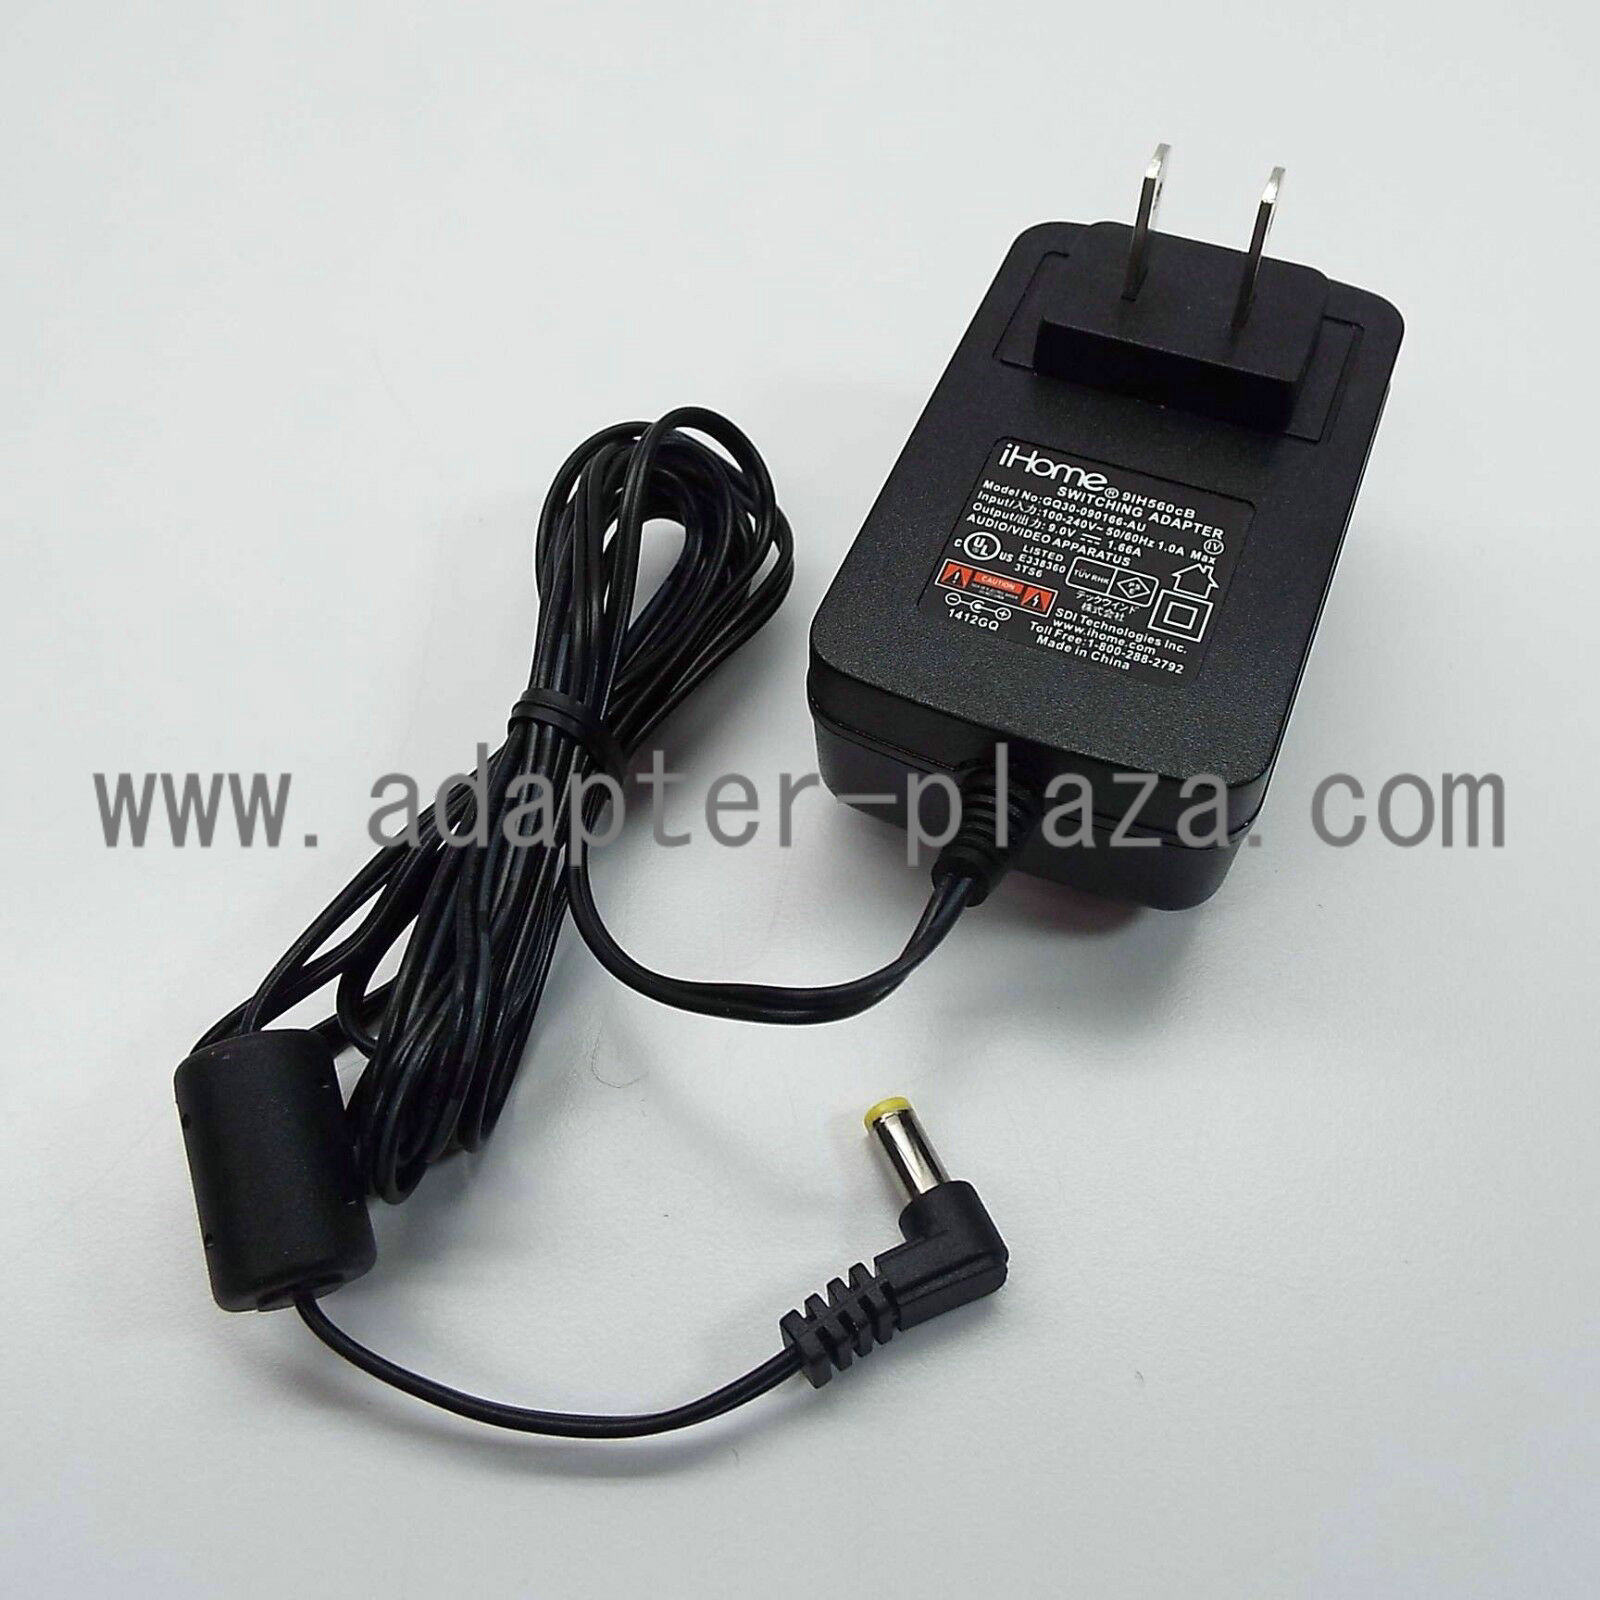 *Brand NEW* 9.0V 1.66A FOR 91H560CB AC DC Adapter POWER SUPPLY